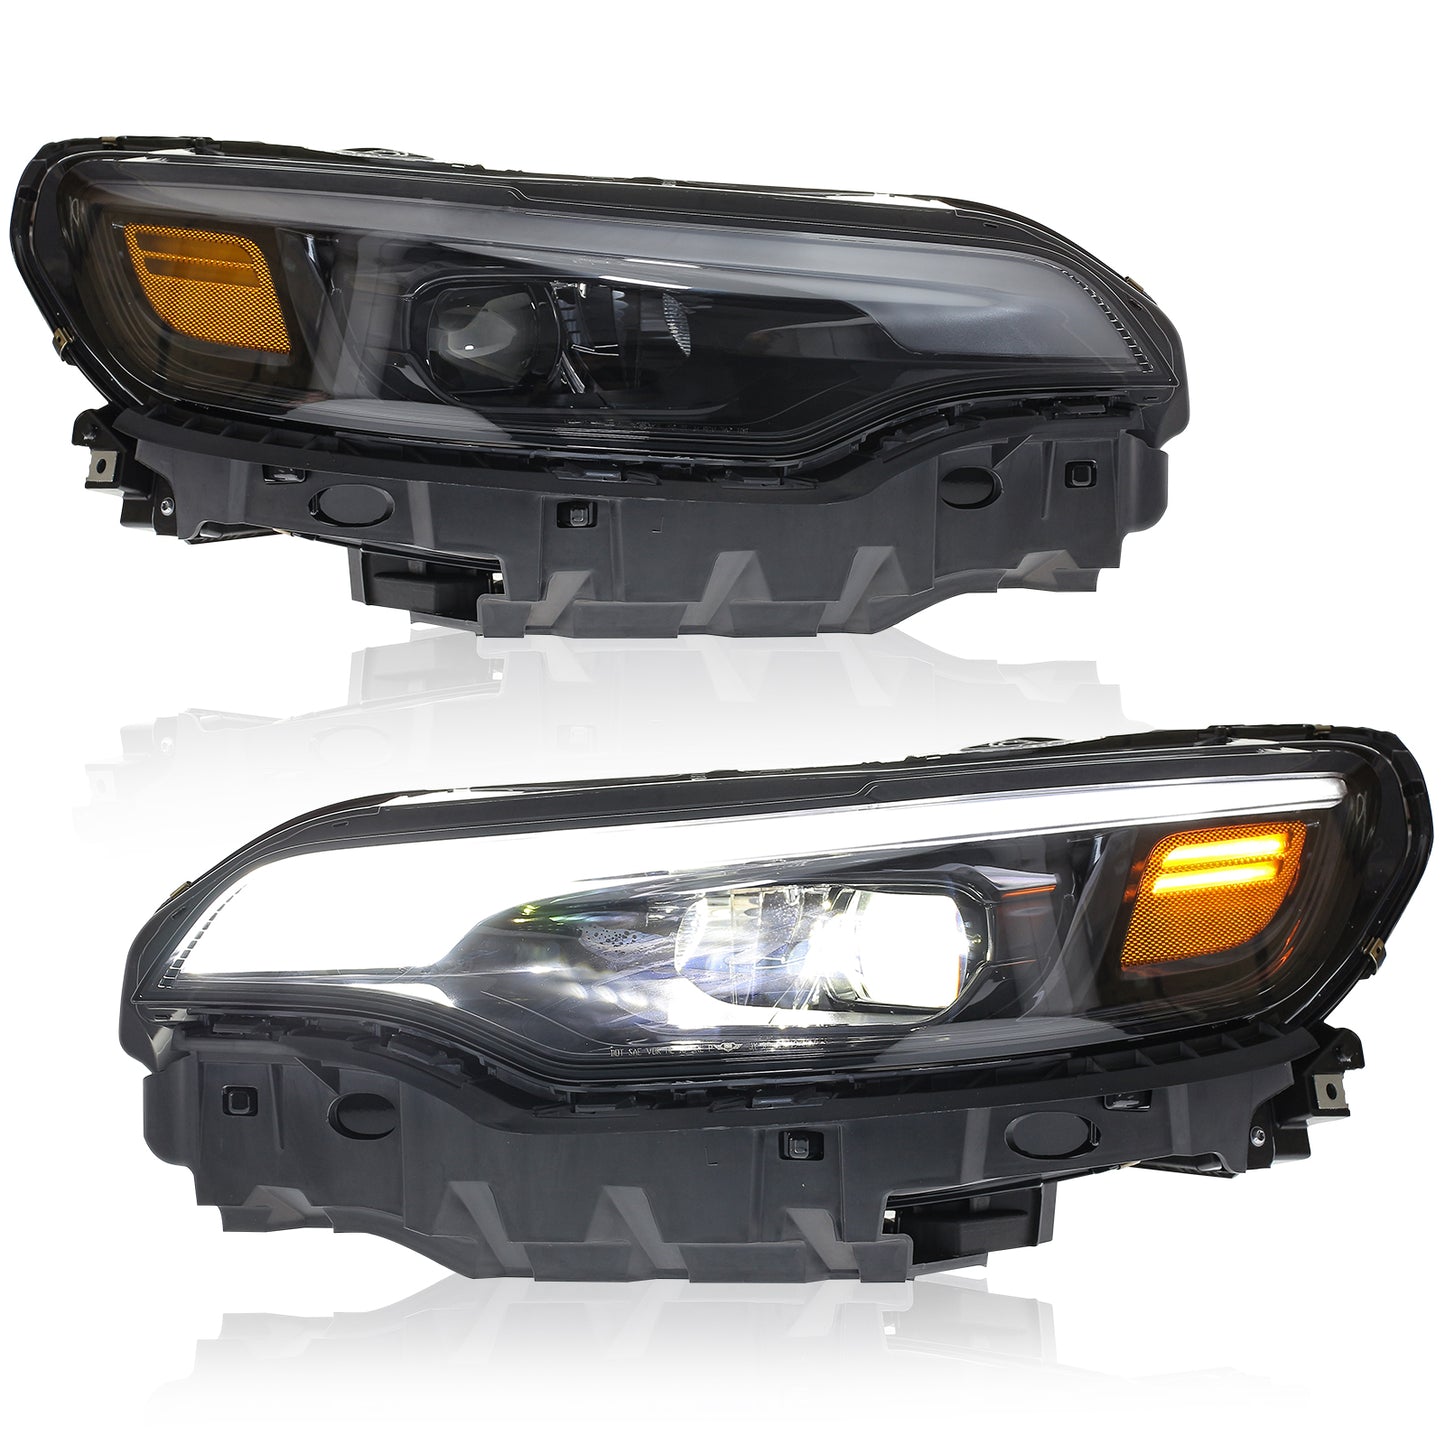 JOLUNG Full LED Headlights Assembly For Jeep Cherokee 2019-2022